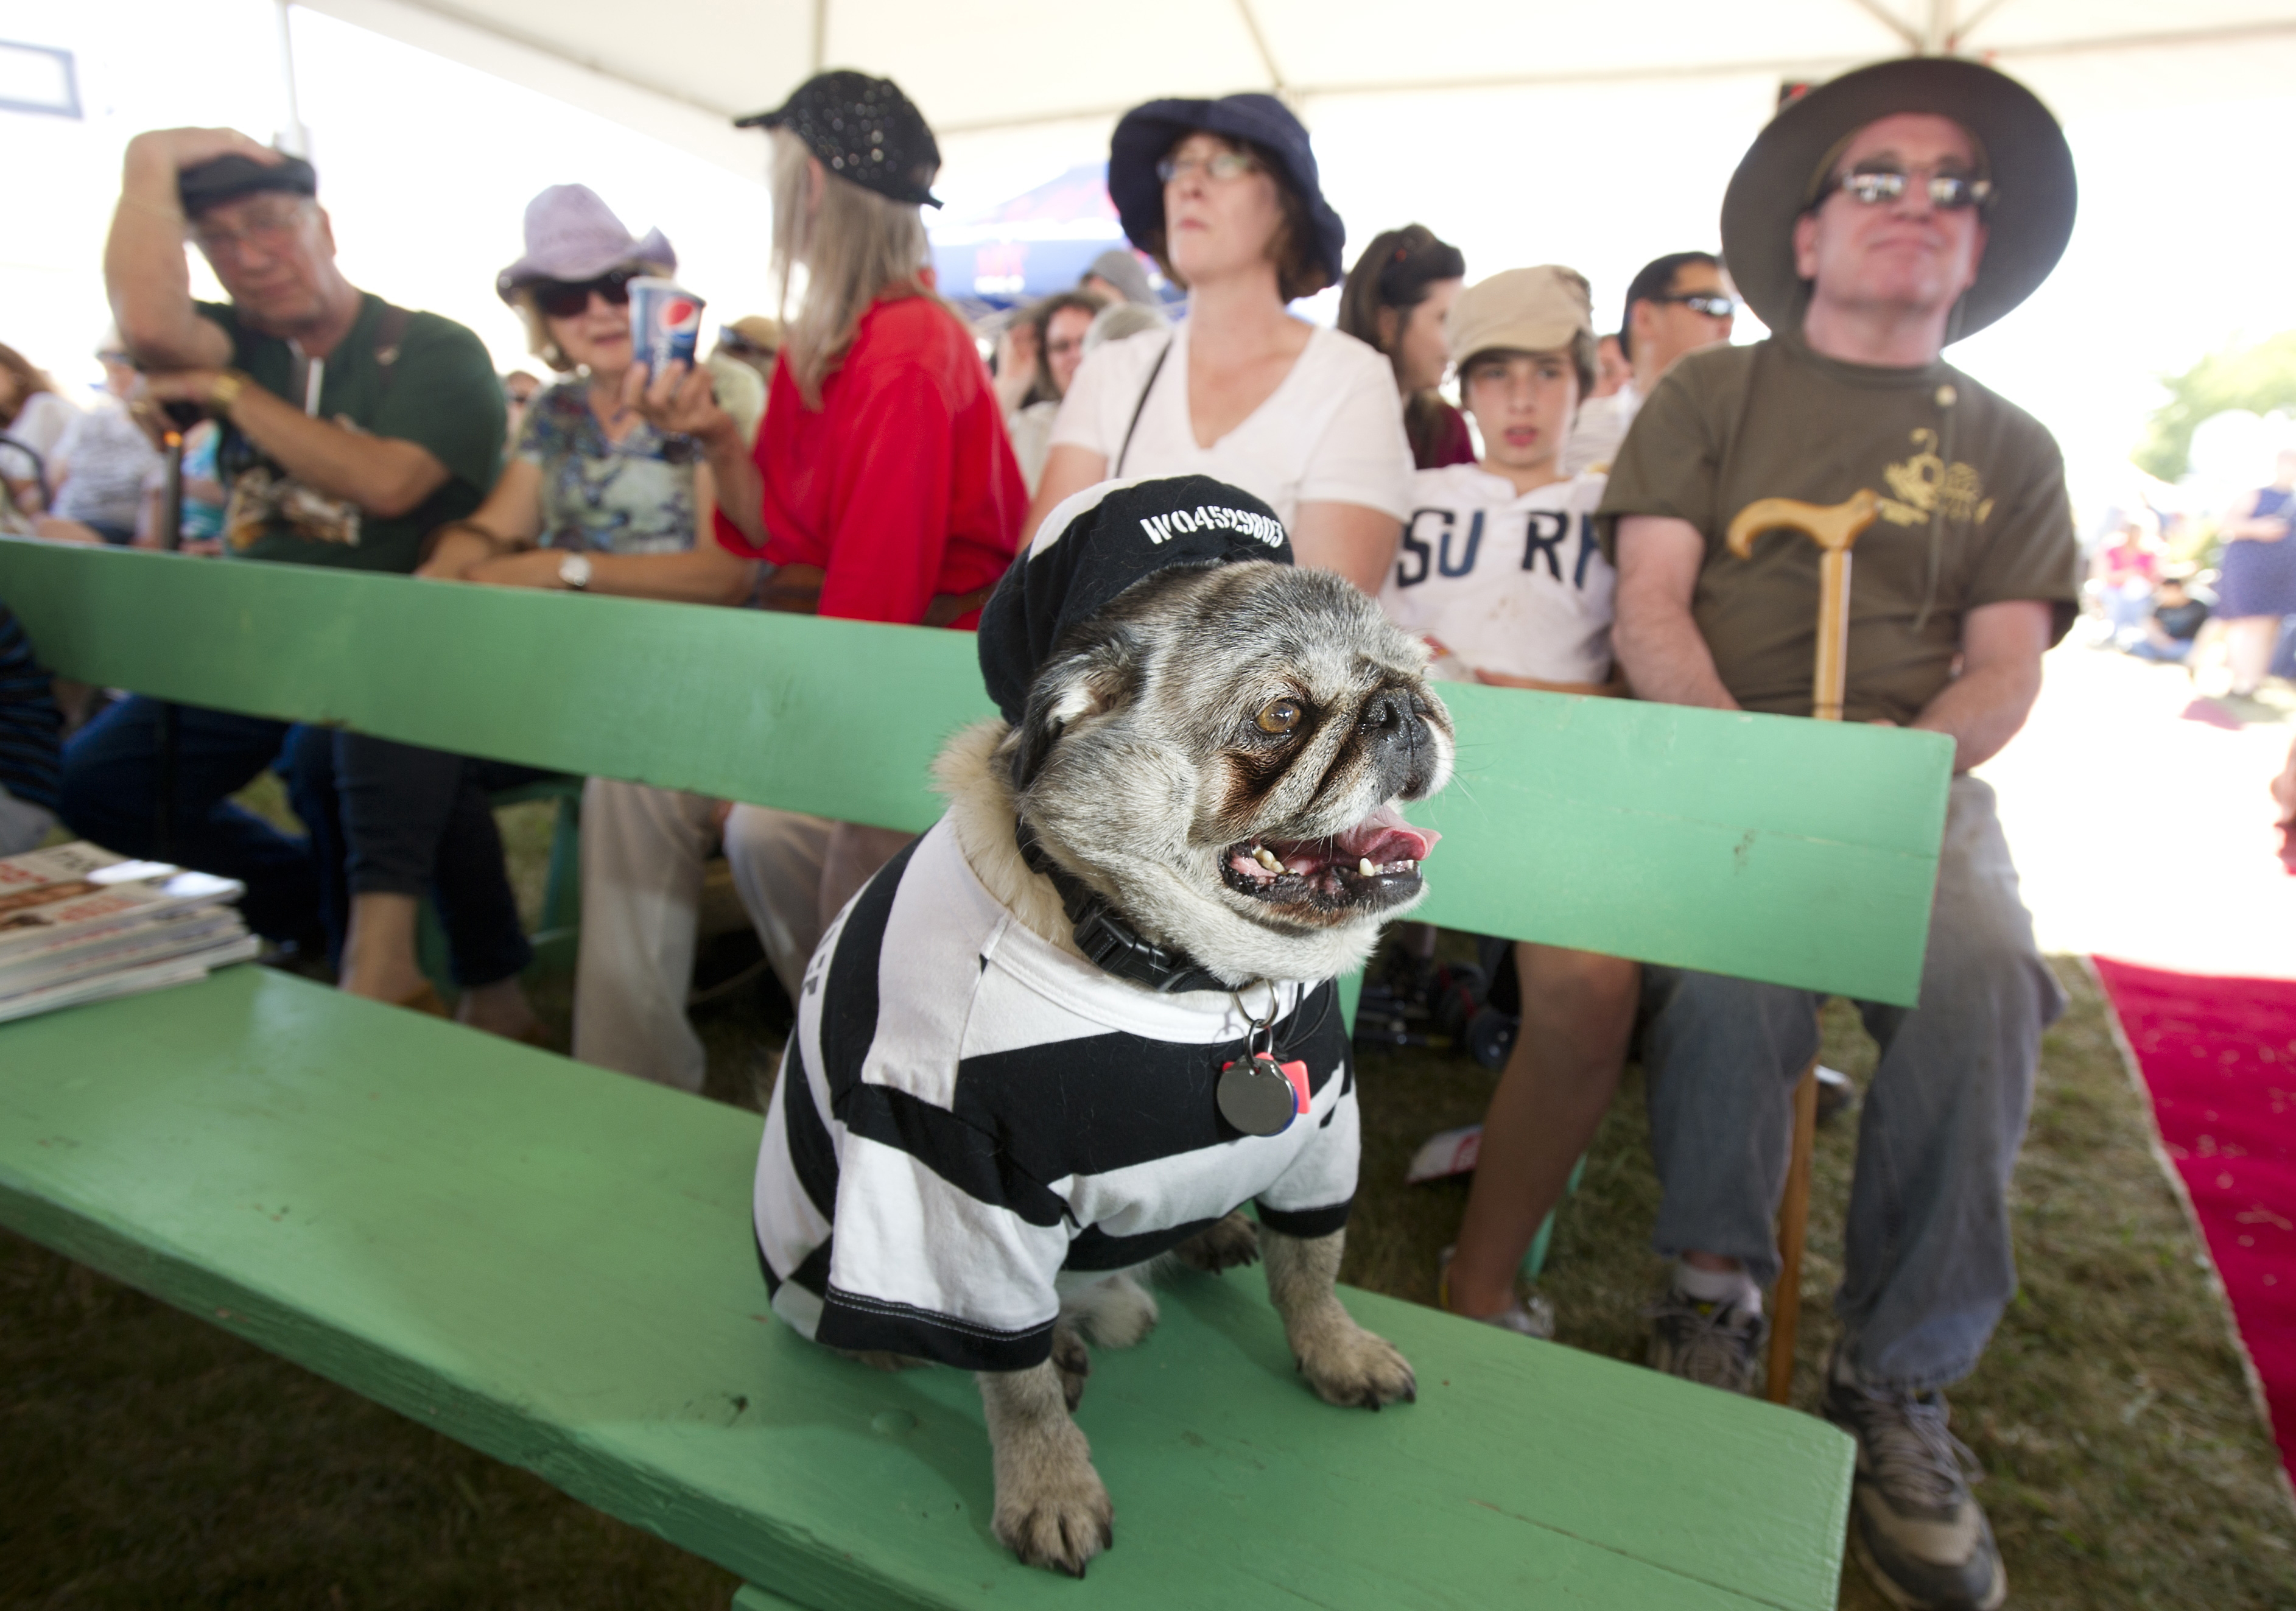 In this June 21, 2013 file photo, Grovie, a 10-year-old pug, waits to compete in the 25th annual World's Ugliest Dog Contest at the Sonoma-Marin Fair in Petaluma, Calif.